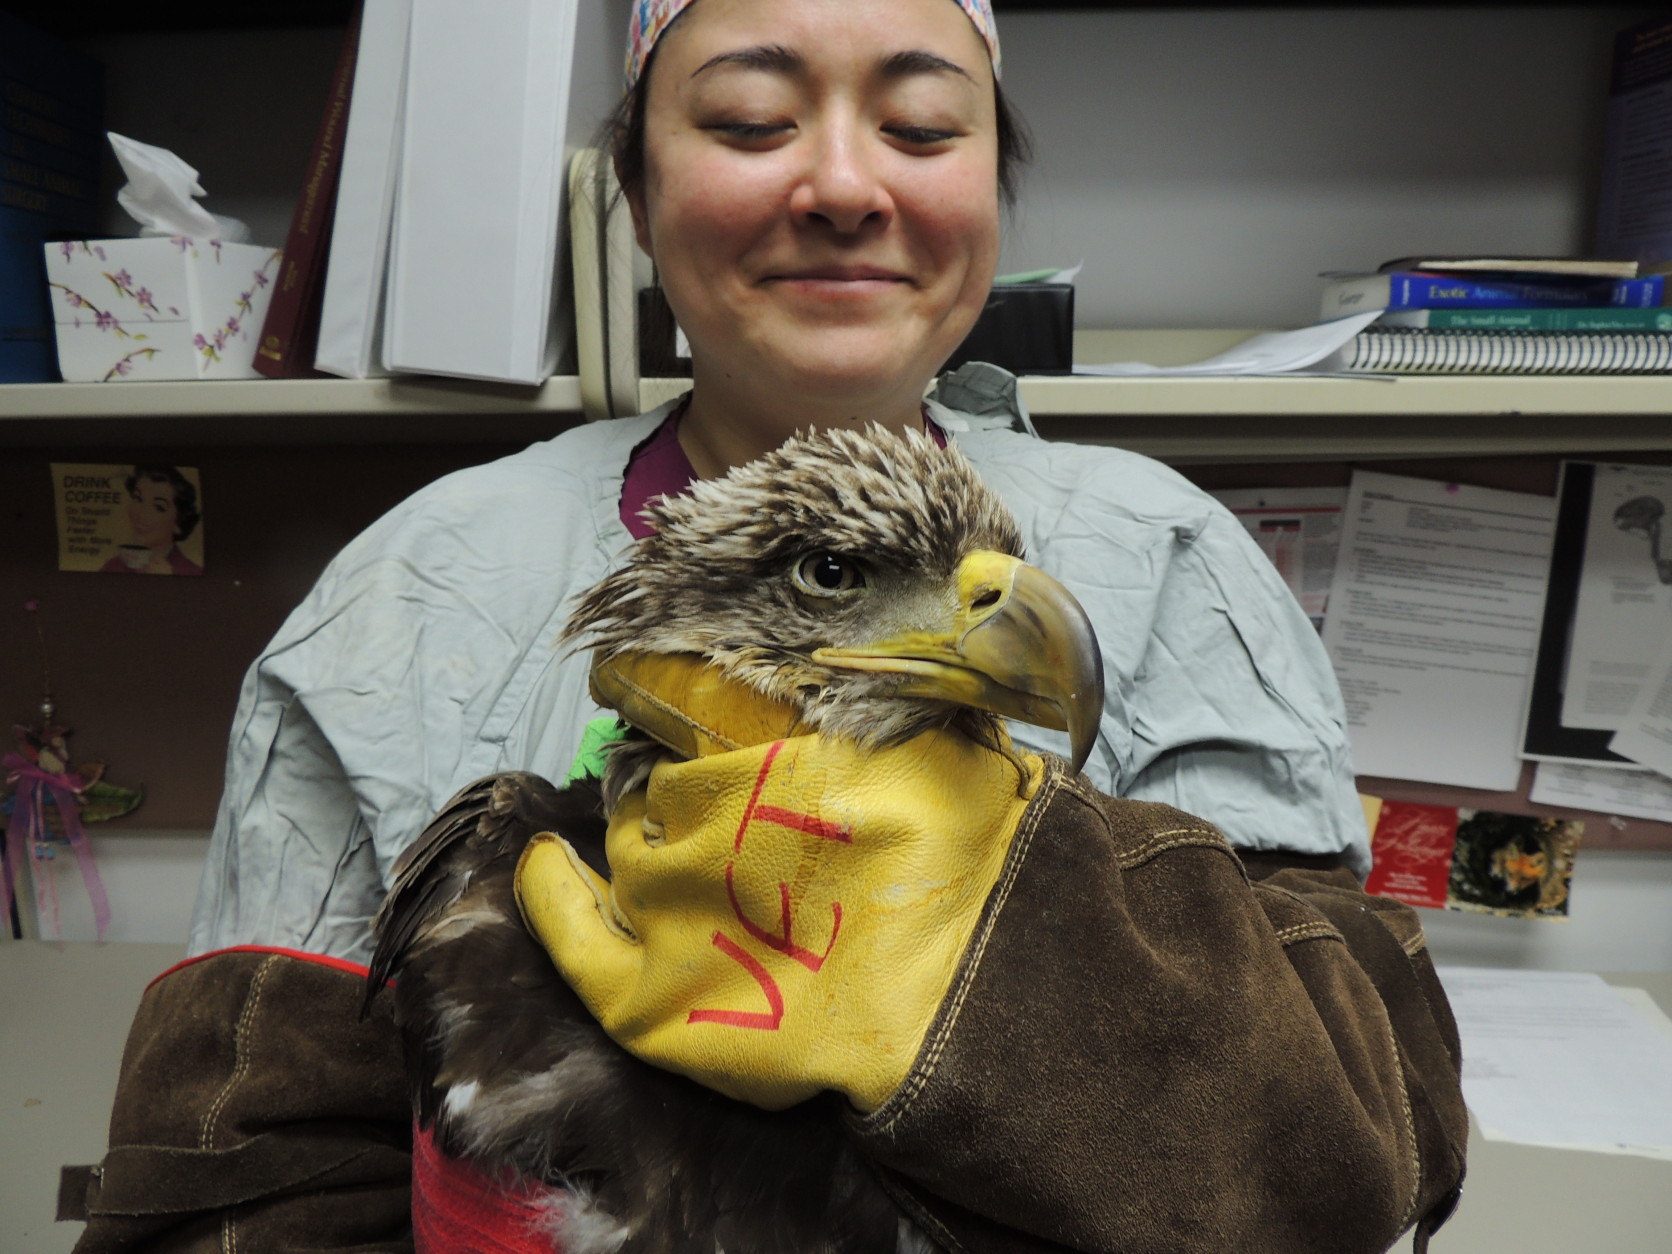 This eagle also suffered from lead toxicity and subsequently passed away. (Courtesy Wildlife Center of Virginia)